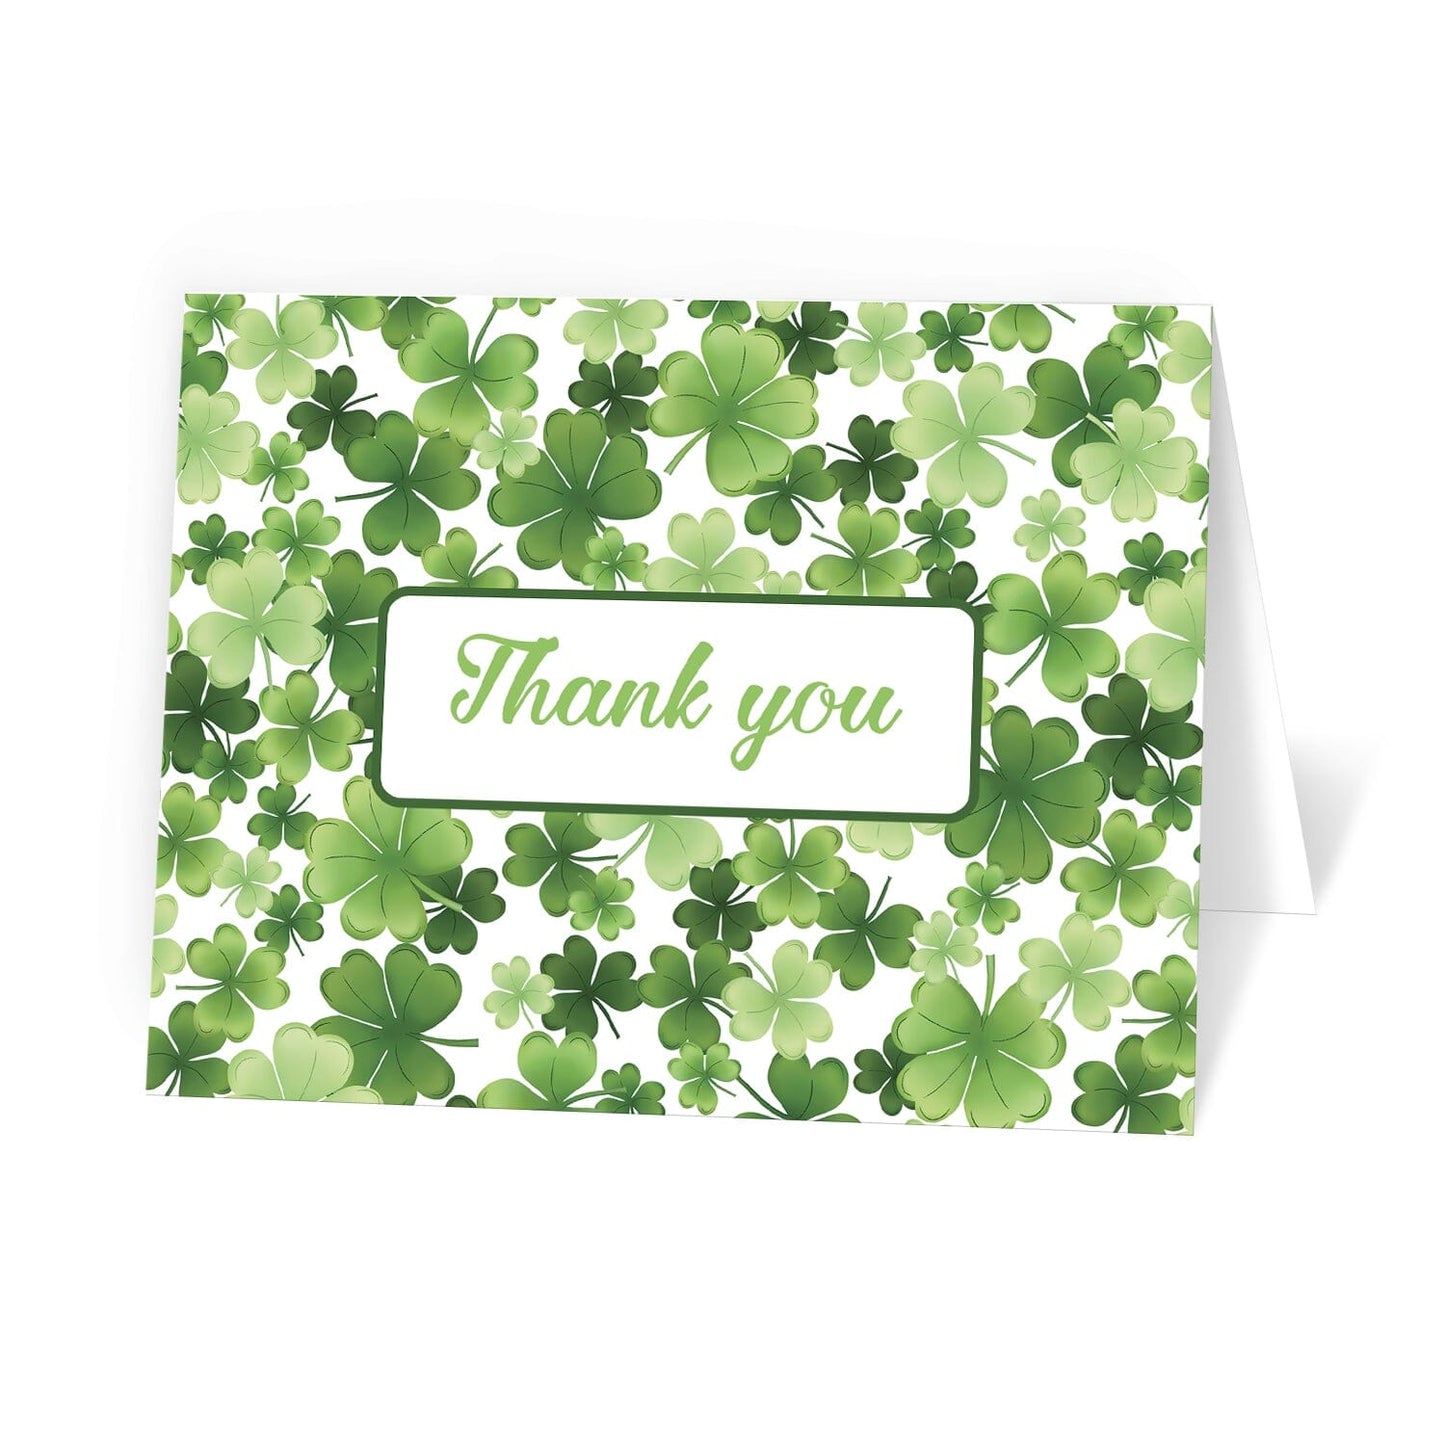 Shamrocks and 4-Leaf Clovers Thank You Cards at Artistically Invited. Luck-inspired thank you cards with "Thank you" on the front in a green script font inside a white rectangle over a gorgeously green pattern design background with shamrocks and 4-leaf clovers in varying sizes and shades of green. 